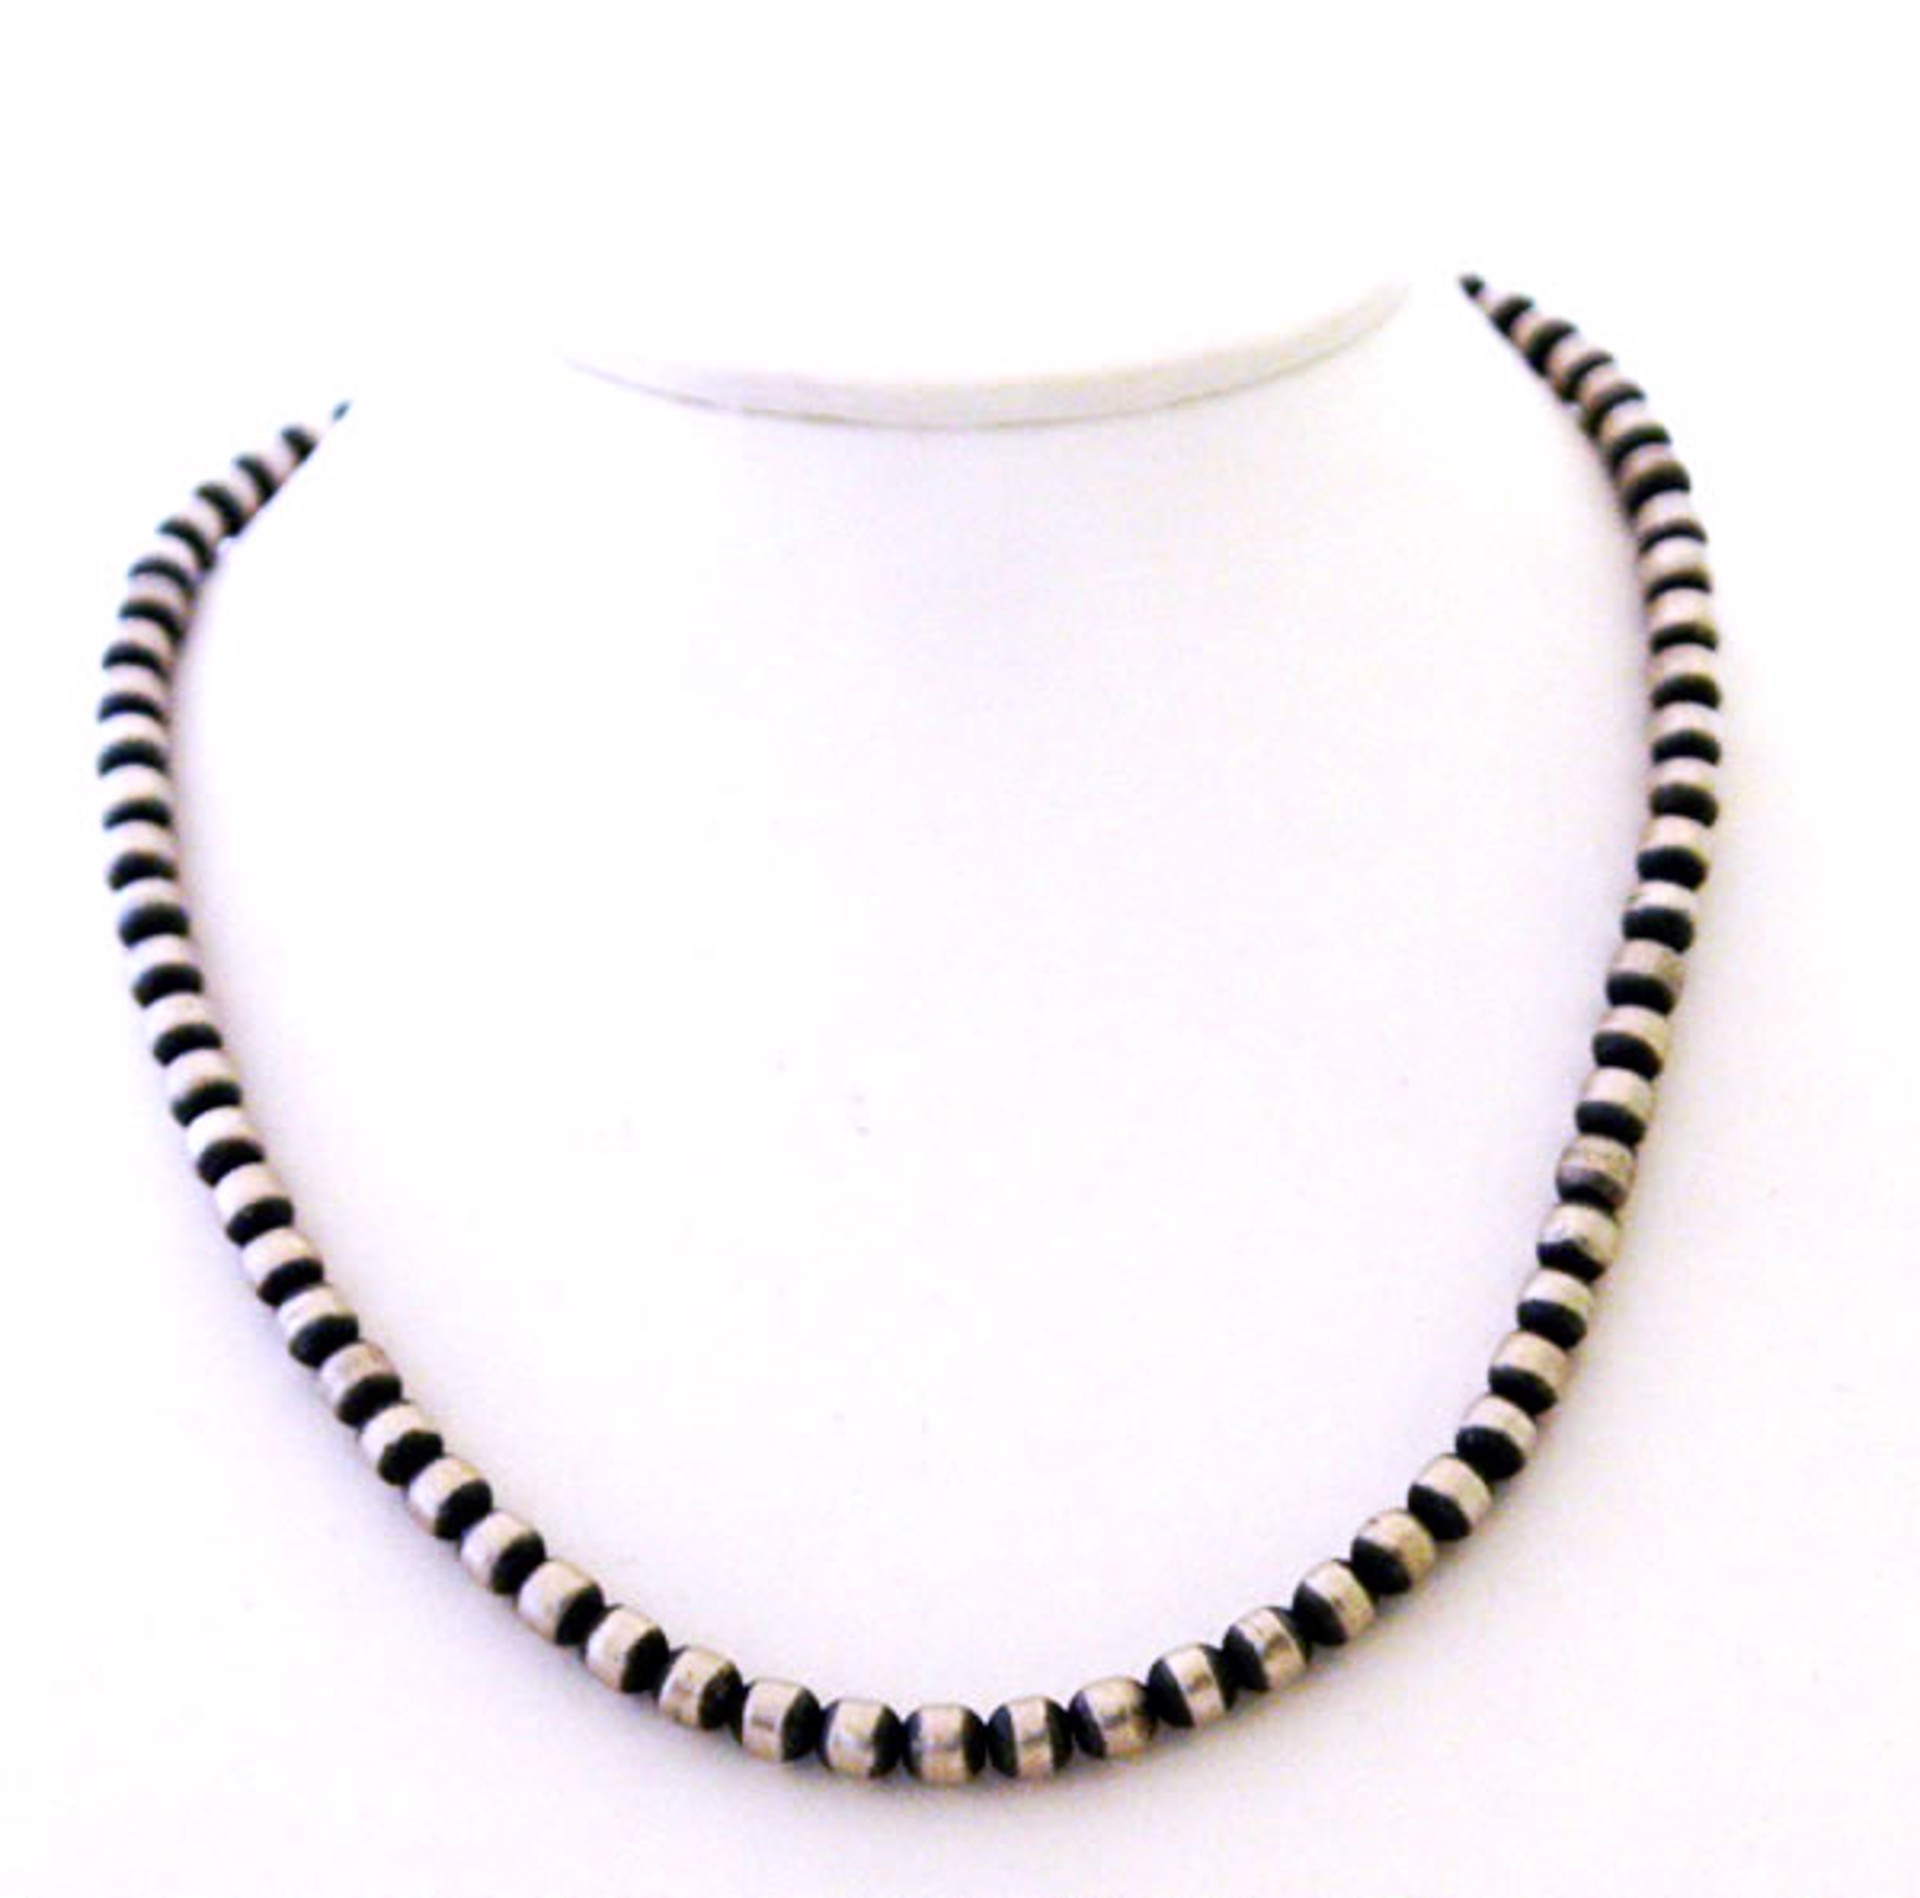 Necklace - 19"- 21" Adjustable Single Strand Antiqued Silver Beads 6MM by Dan Dodson